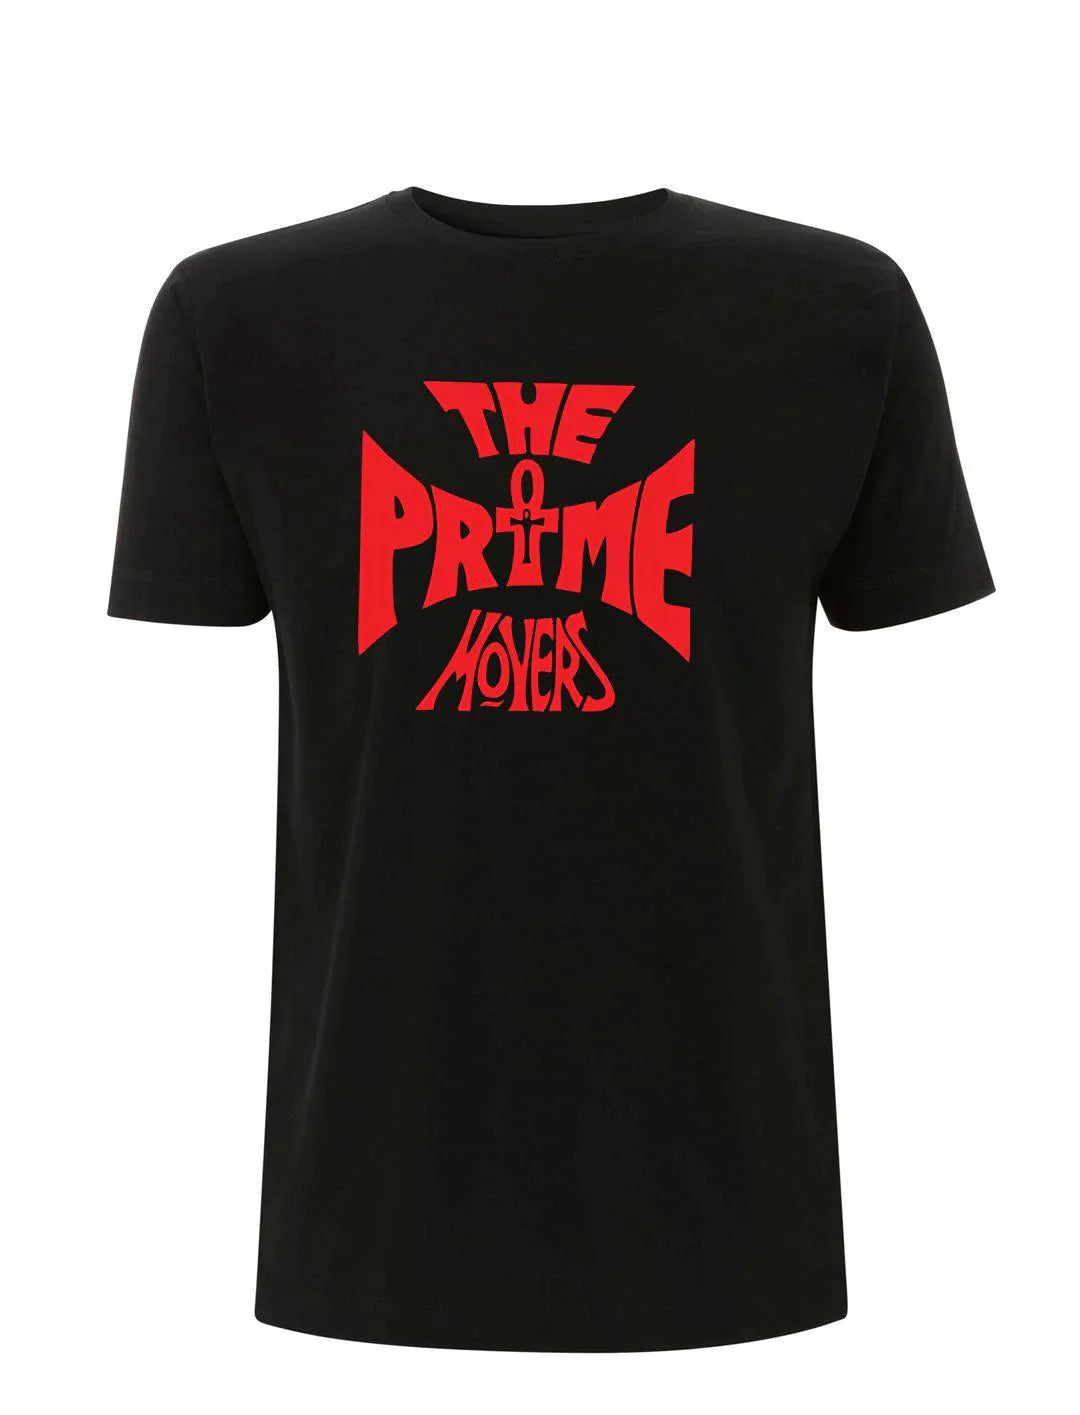 THE PRIME MOVERS: Logo T-Shirt Official Merchandise by Sound is Colour (Many Colours), medway garage